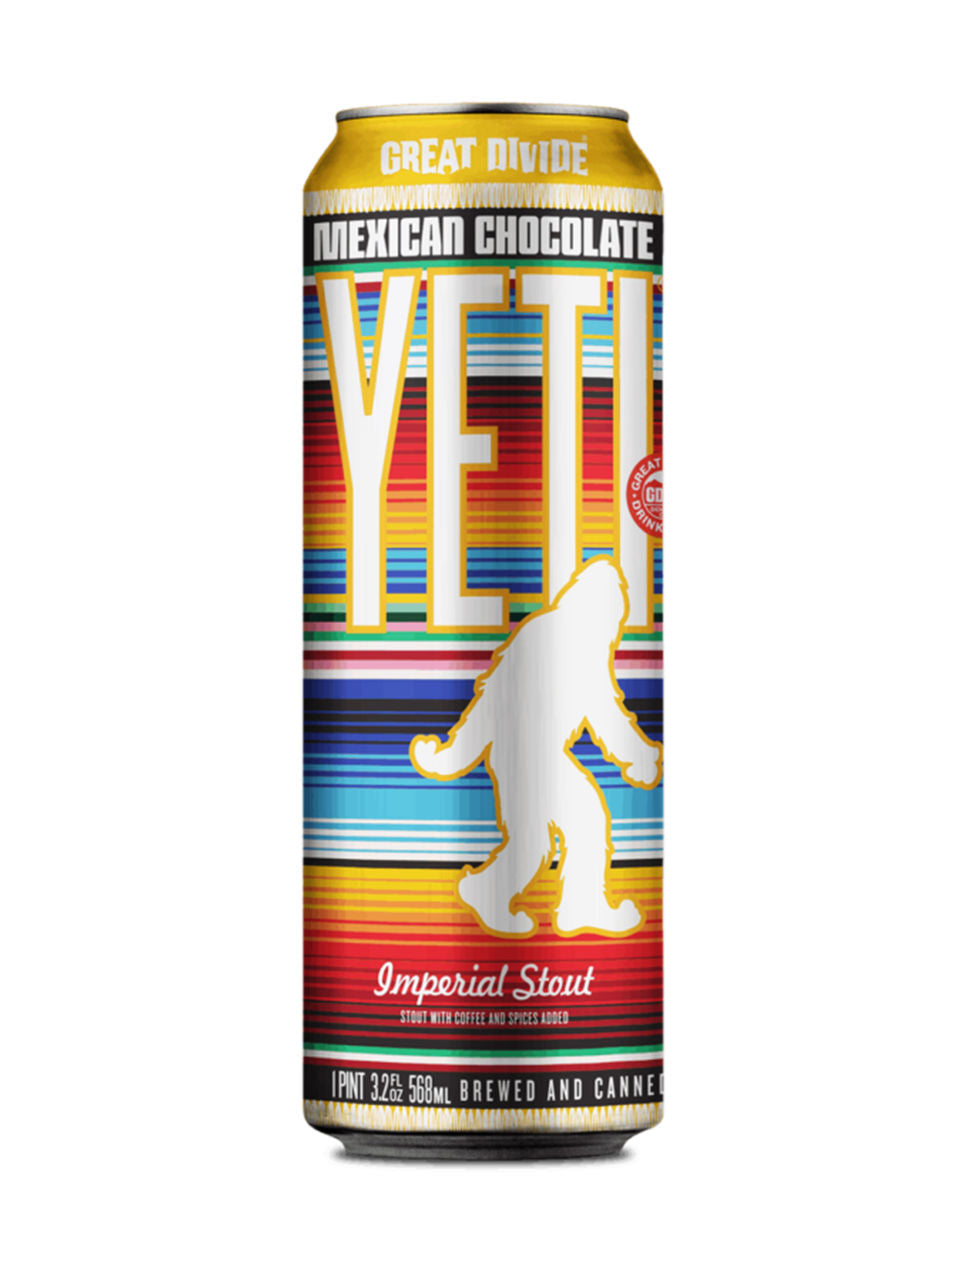 Great Divide Mexican Chocolate Yeti Imperial Stout  568 mL can